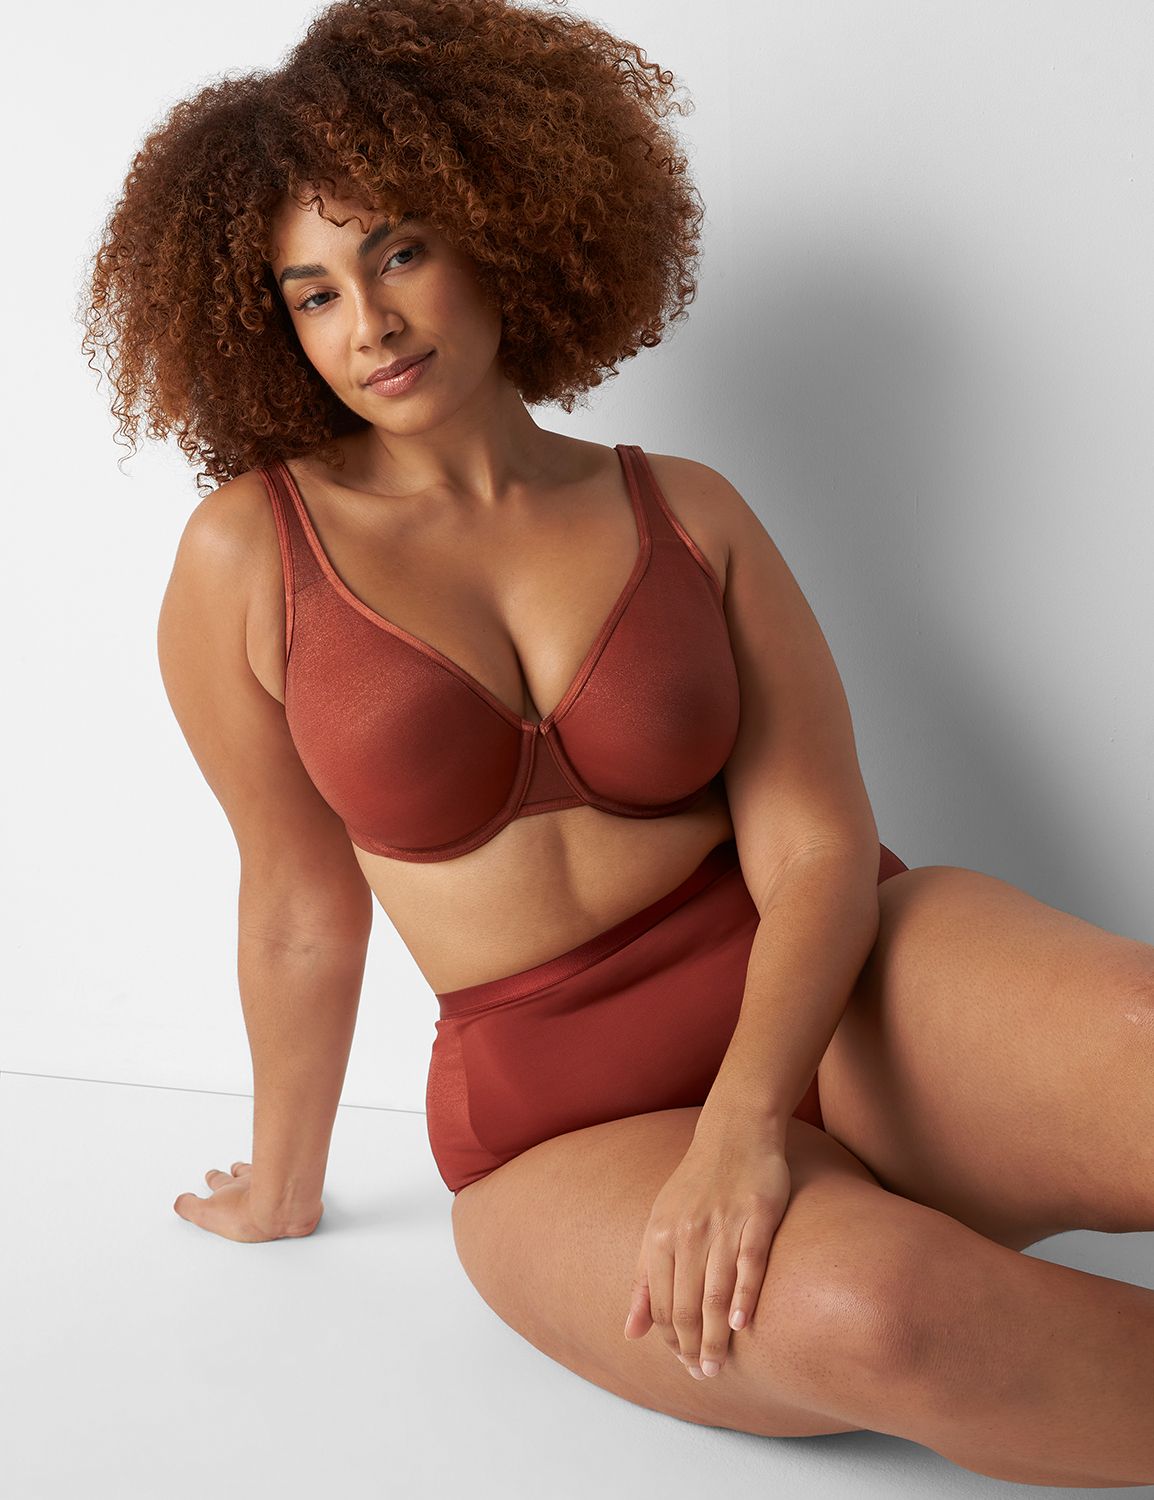 This Huge End-of-Summer Bra Sale Includes 60+ Styles With 'Amazing'  Support, and Everything Is Just $29